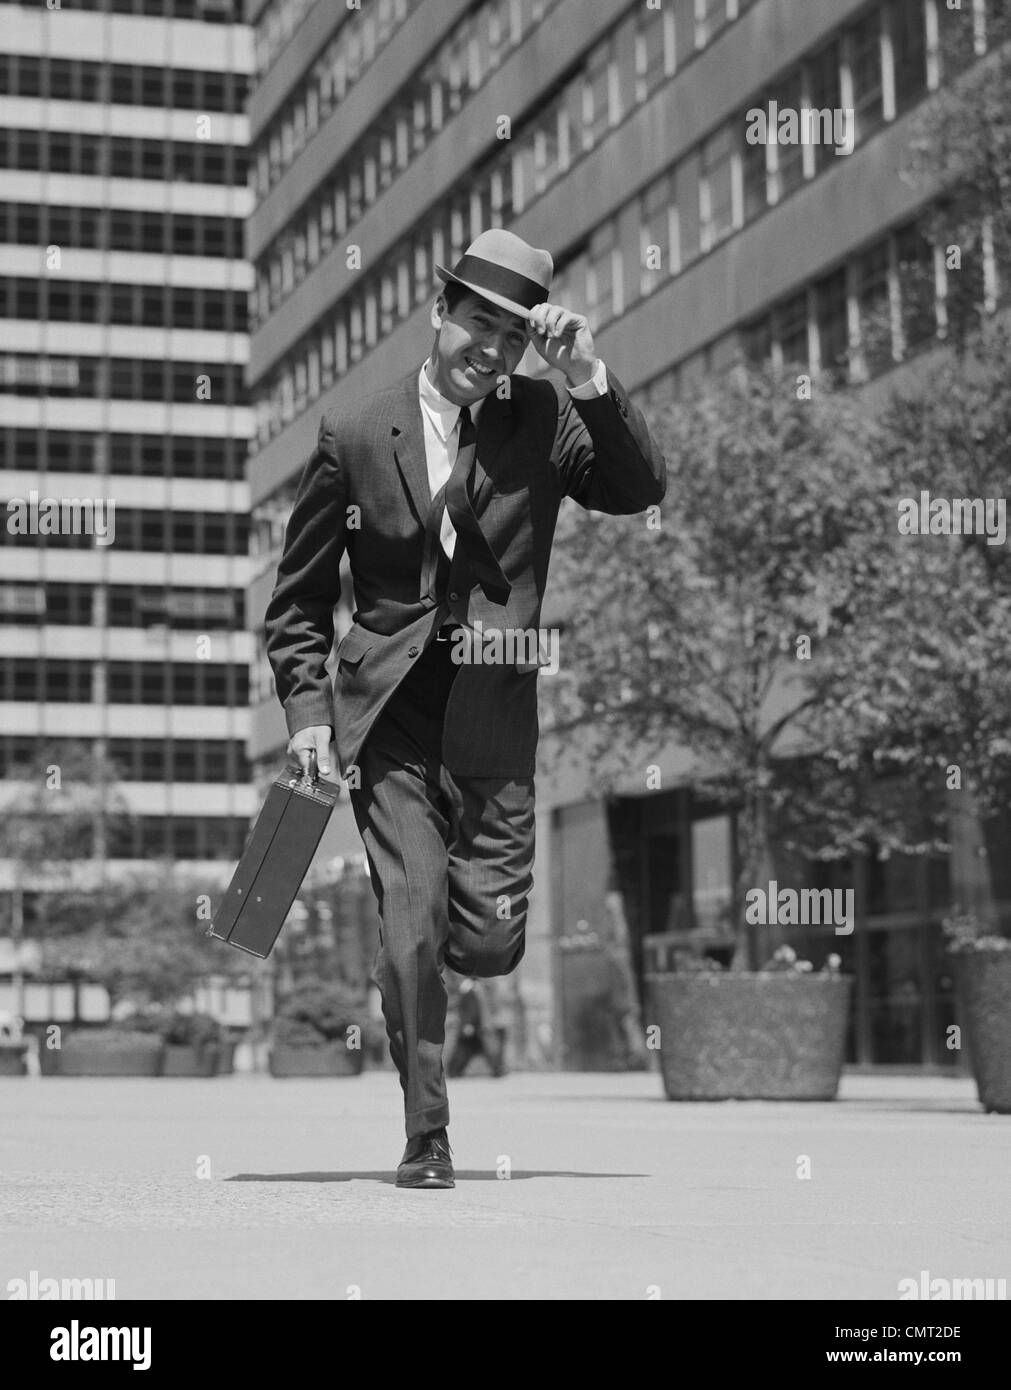 1960s BUSINESSMAN CARRYING BRIEFCASE HOLDING HIS HAT ON RUNNING DOWN URBAN SIDEWALK Stock Photo